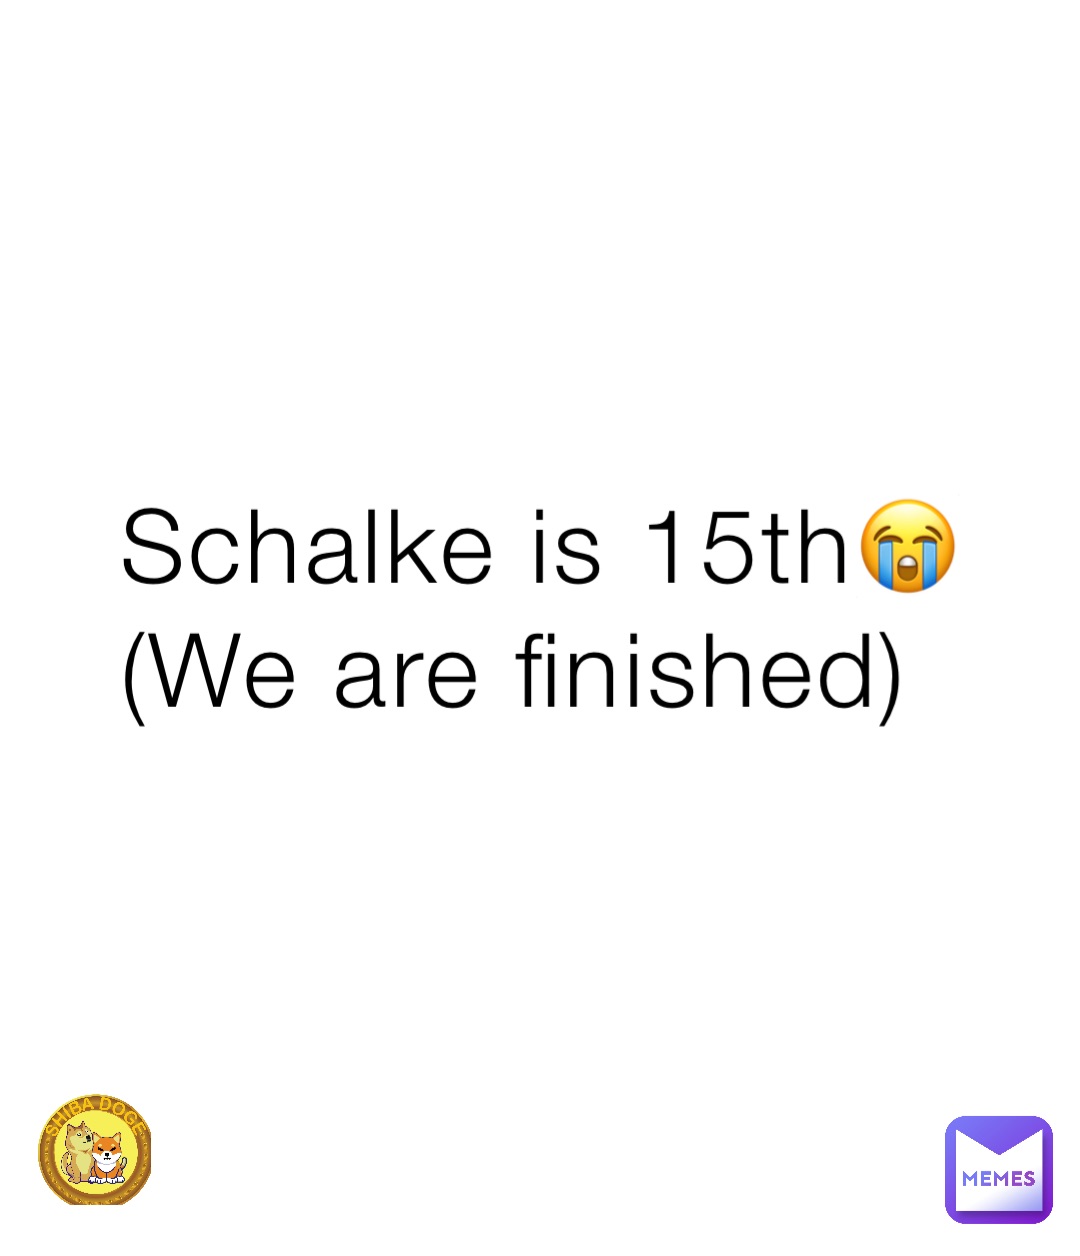 Schalke is 15th😭
(We are finished)